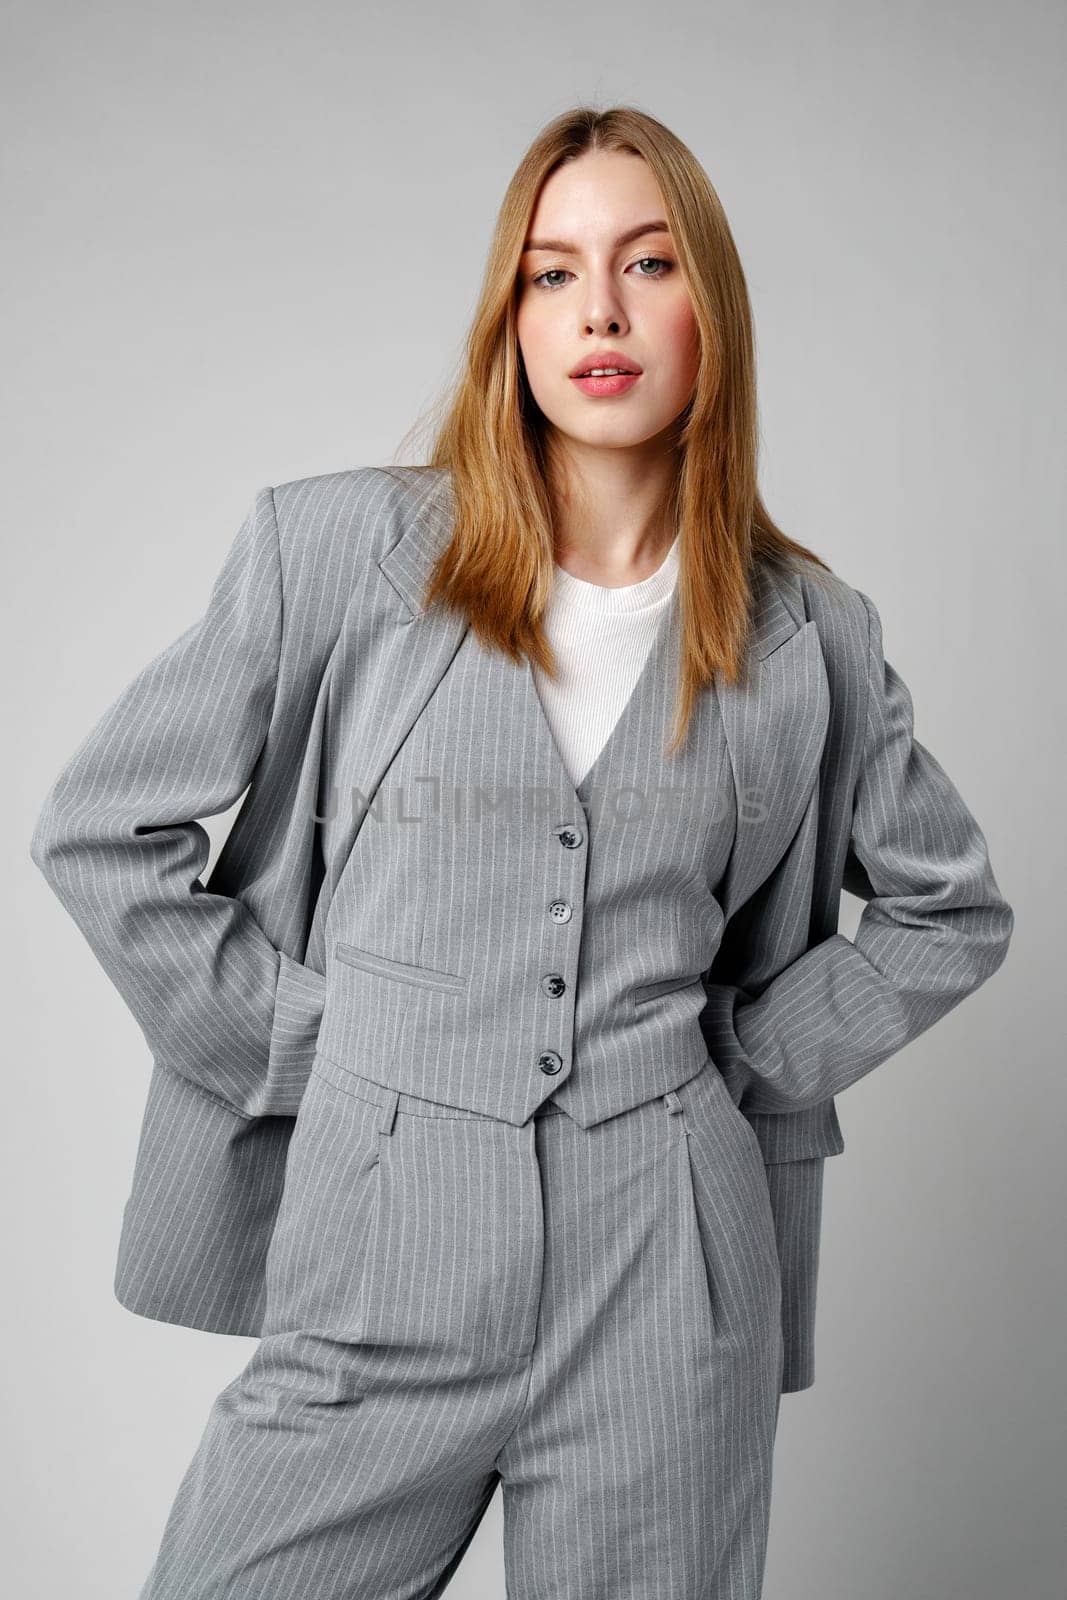 Woman in Gray Suit and White Shirt posing in studio on gray background